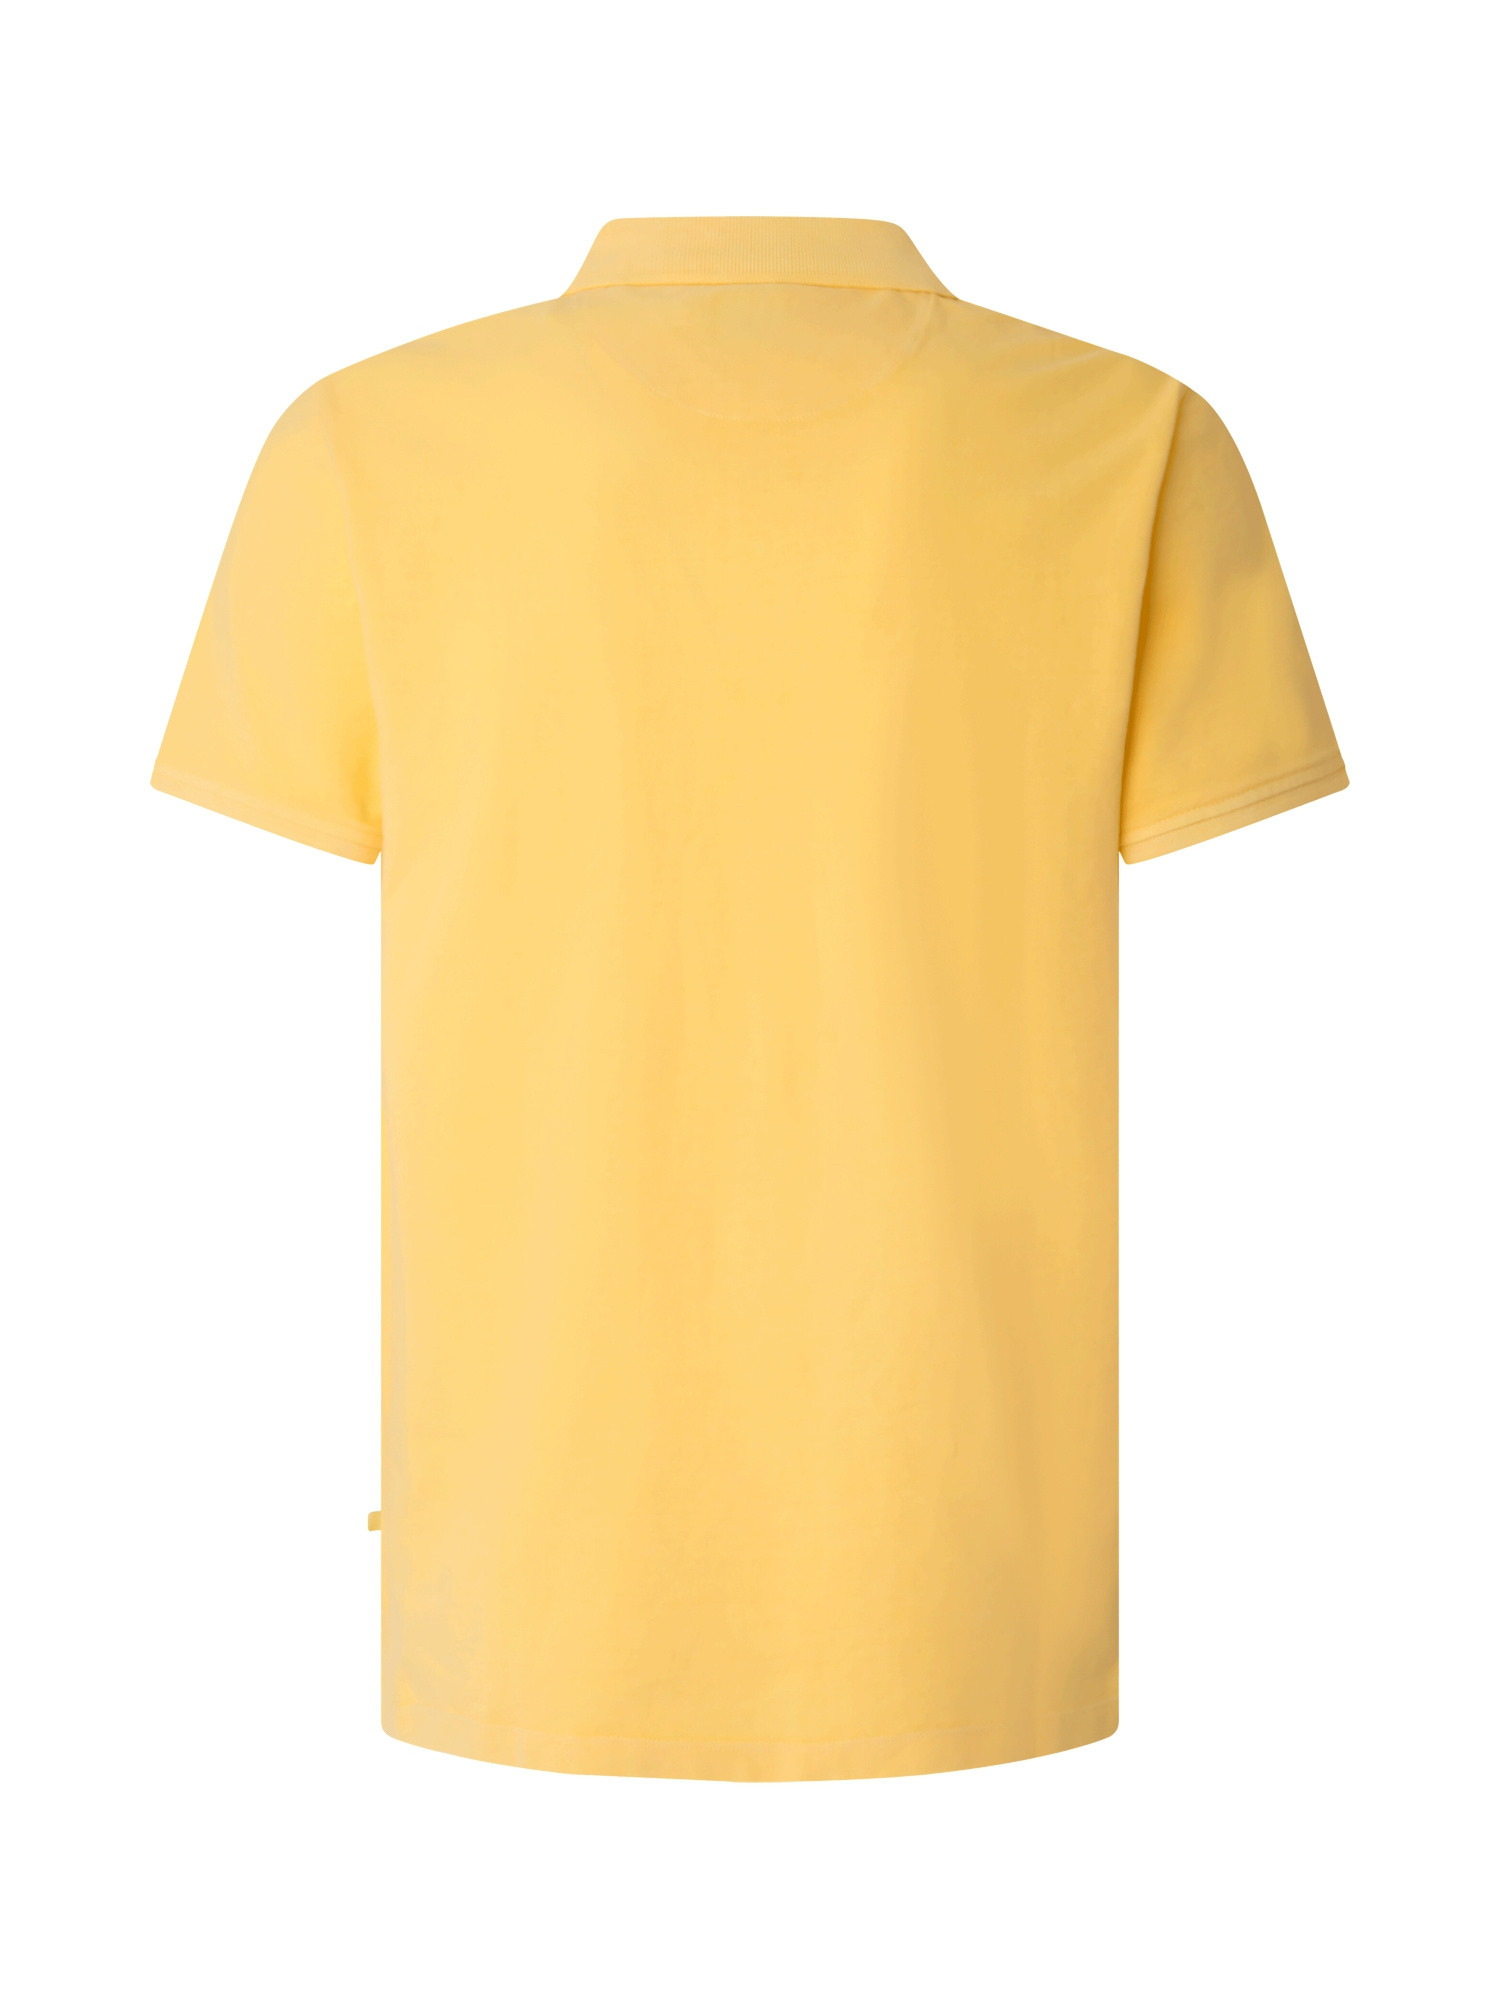 Pepe Jeans - Cotton polo shirt with logo, Sunflower Yellow, large image number 1